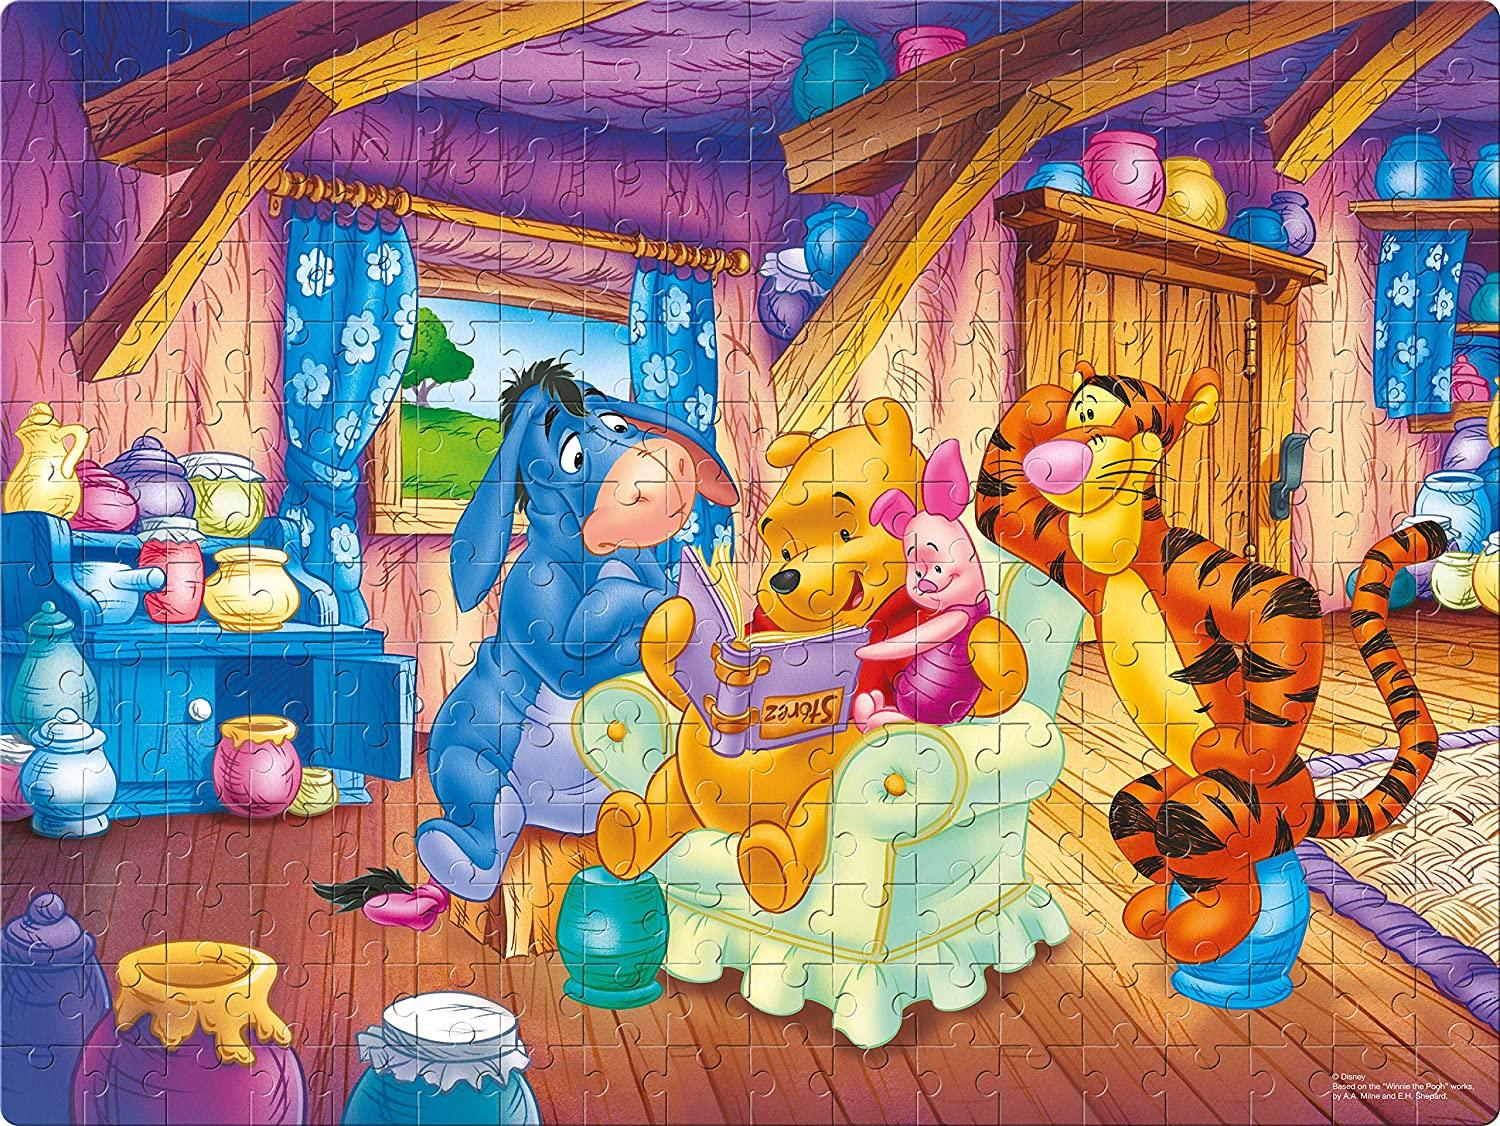 Frank Disney Winnie The Pooh 250 Pieces Jigsaw Puzzle for 8 Year Old Kids and Above